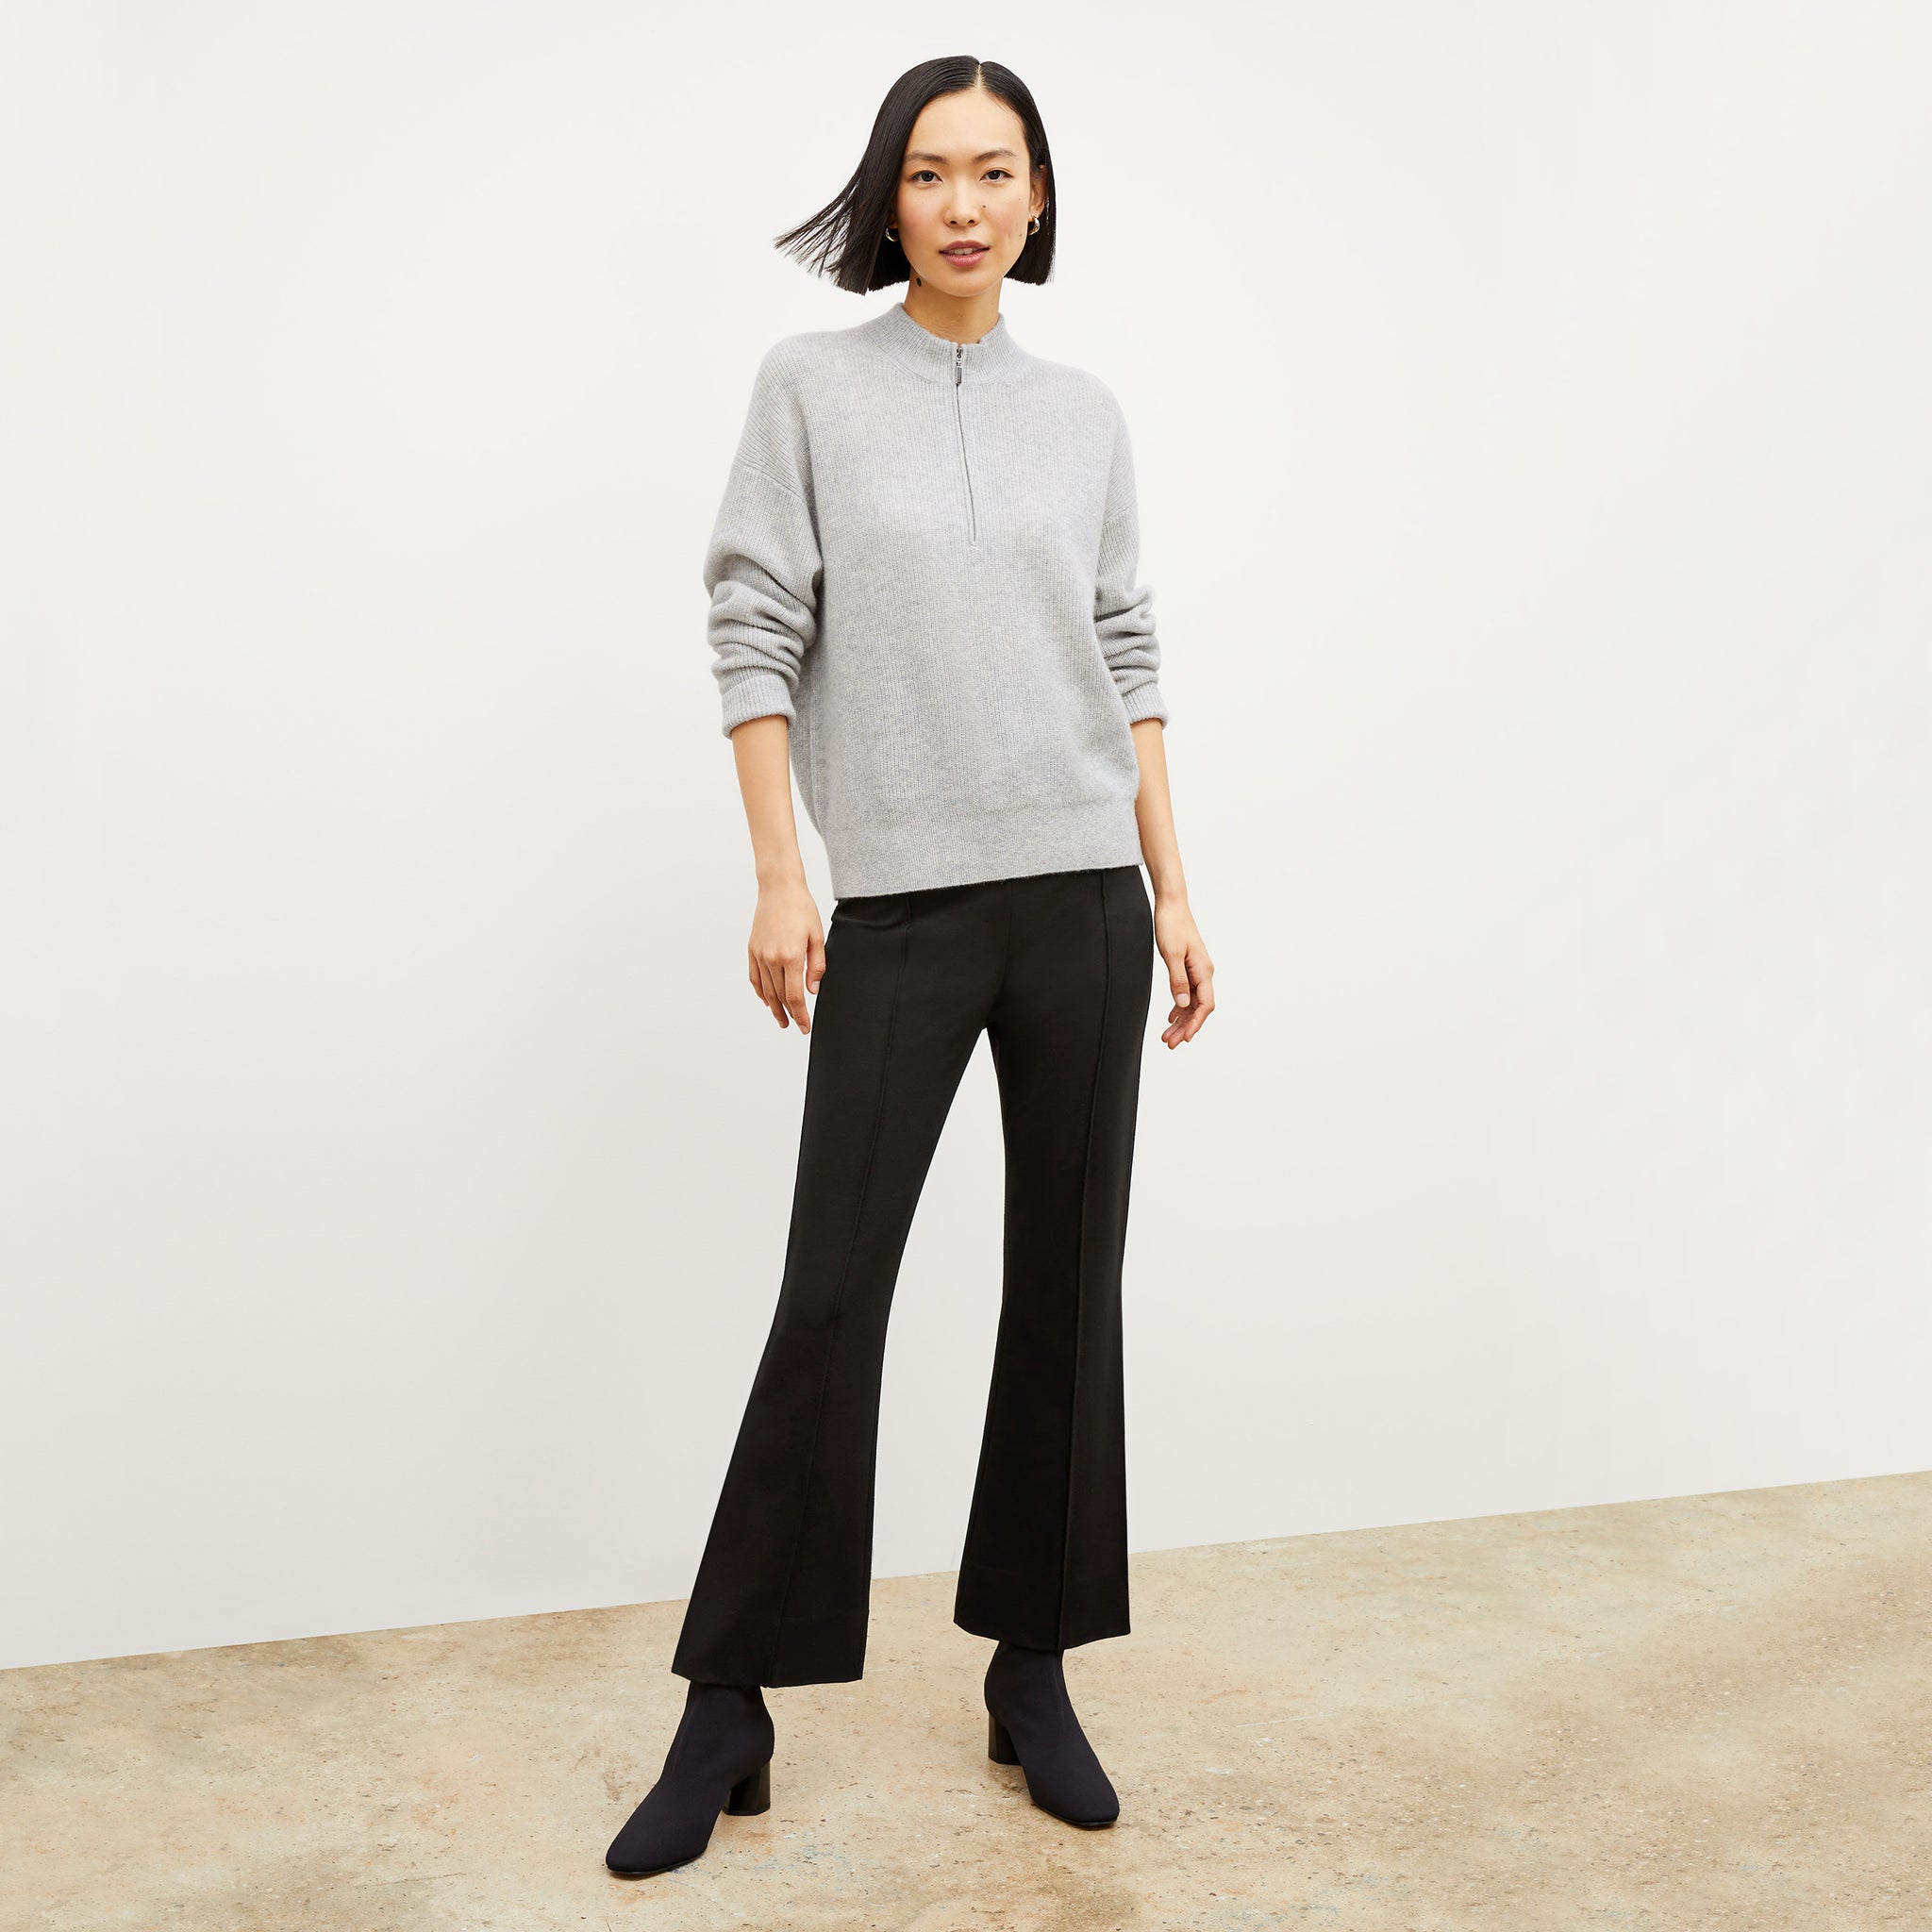 Front image of a woman wearing the Shiloh pant in Black